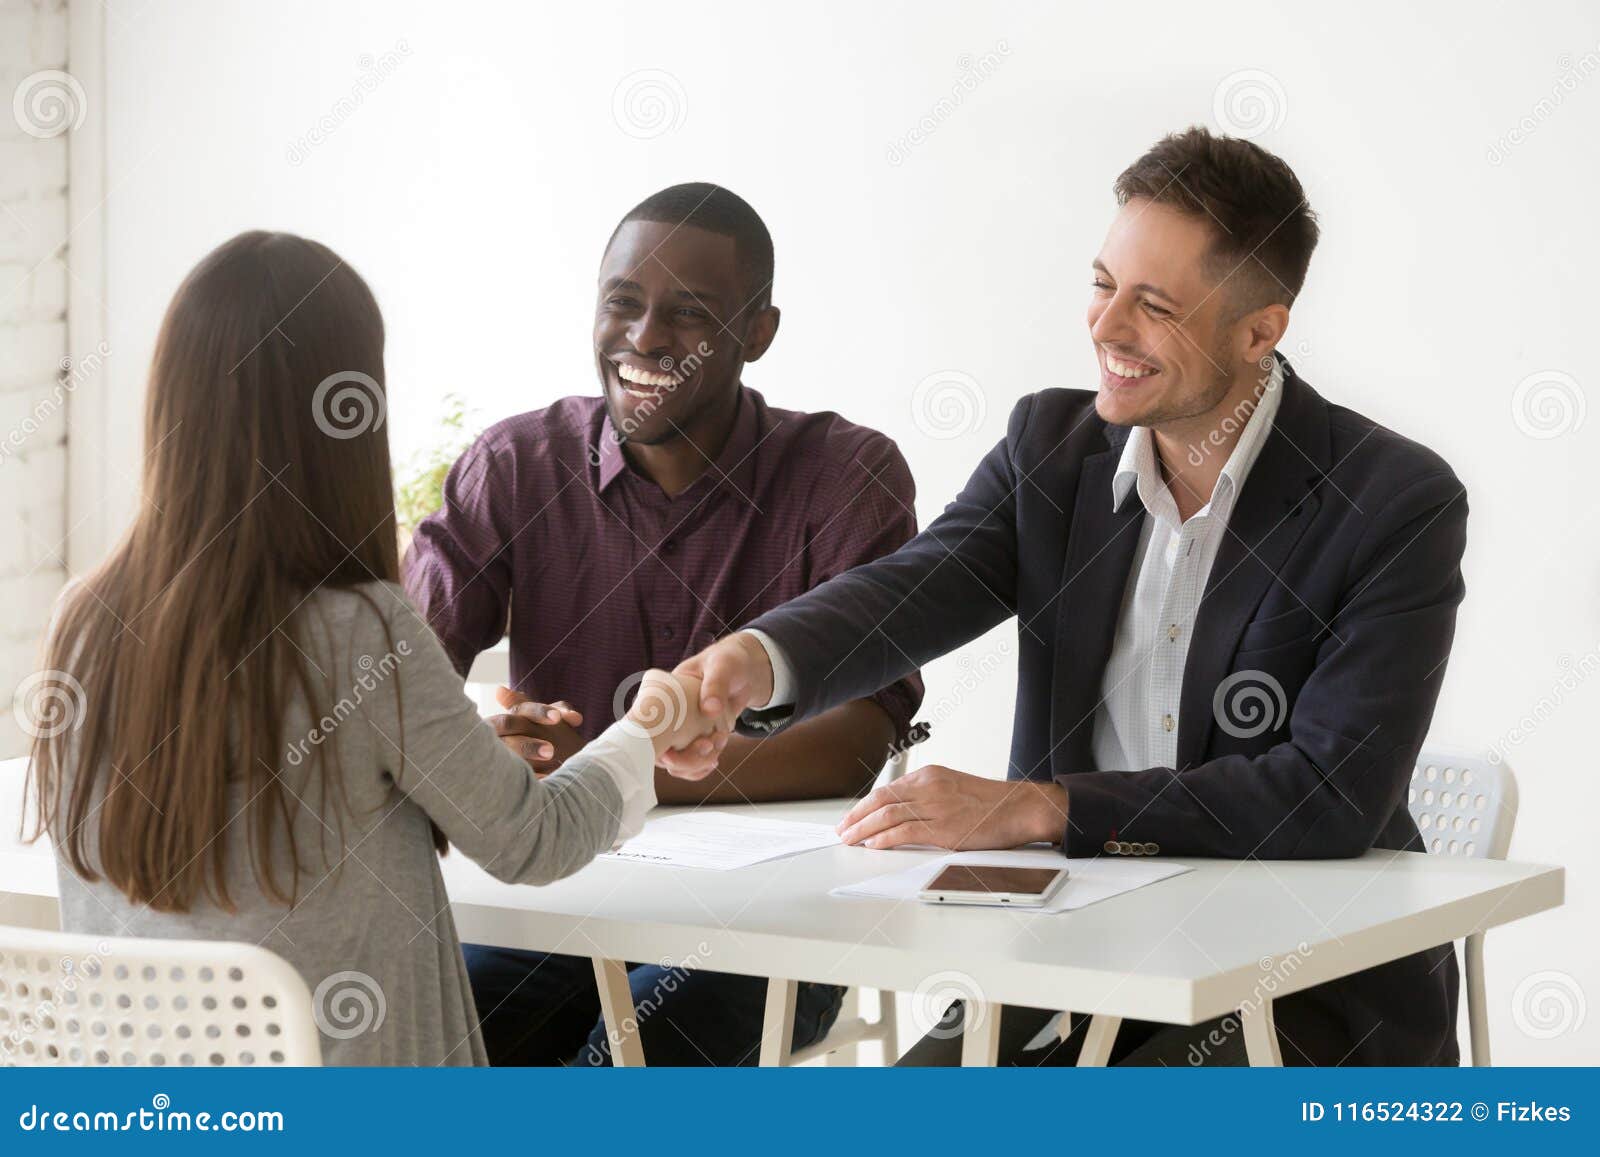 smiling hr handshaking female applicant at job interview, hiring